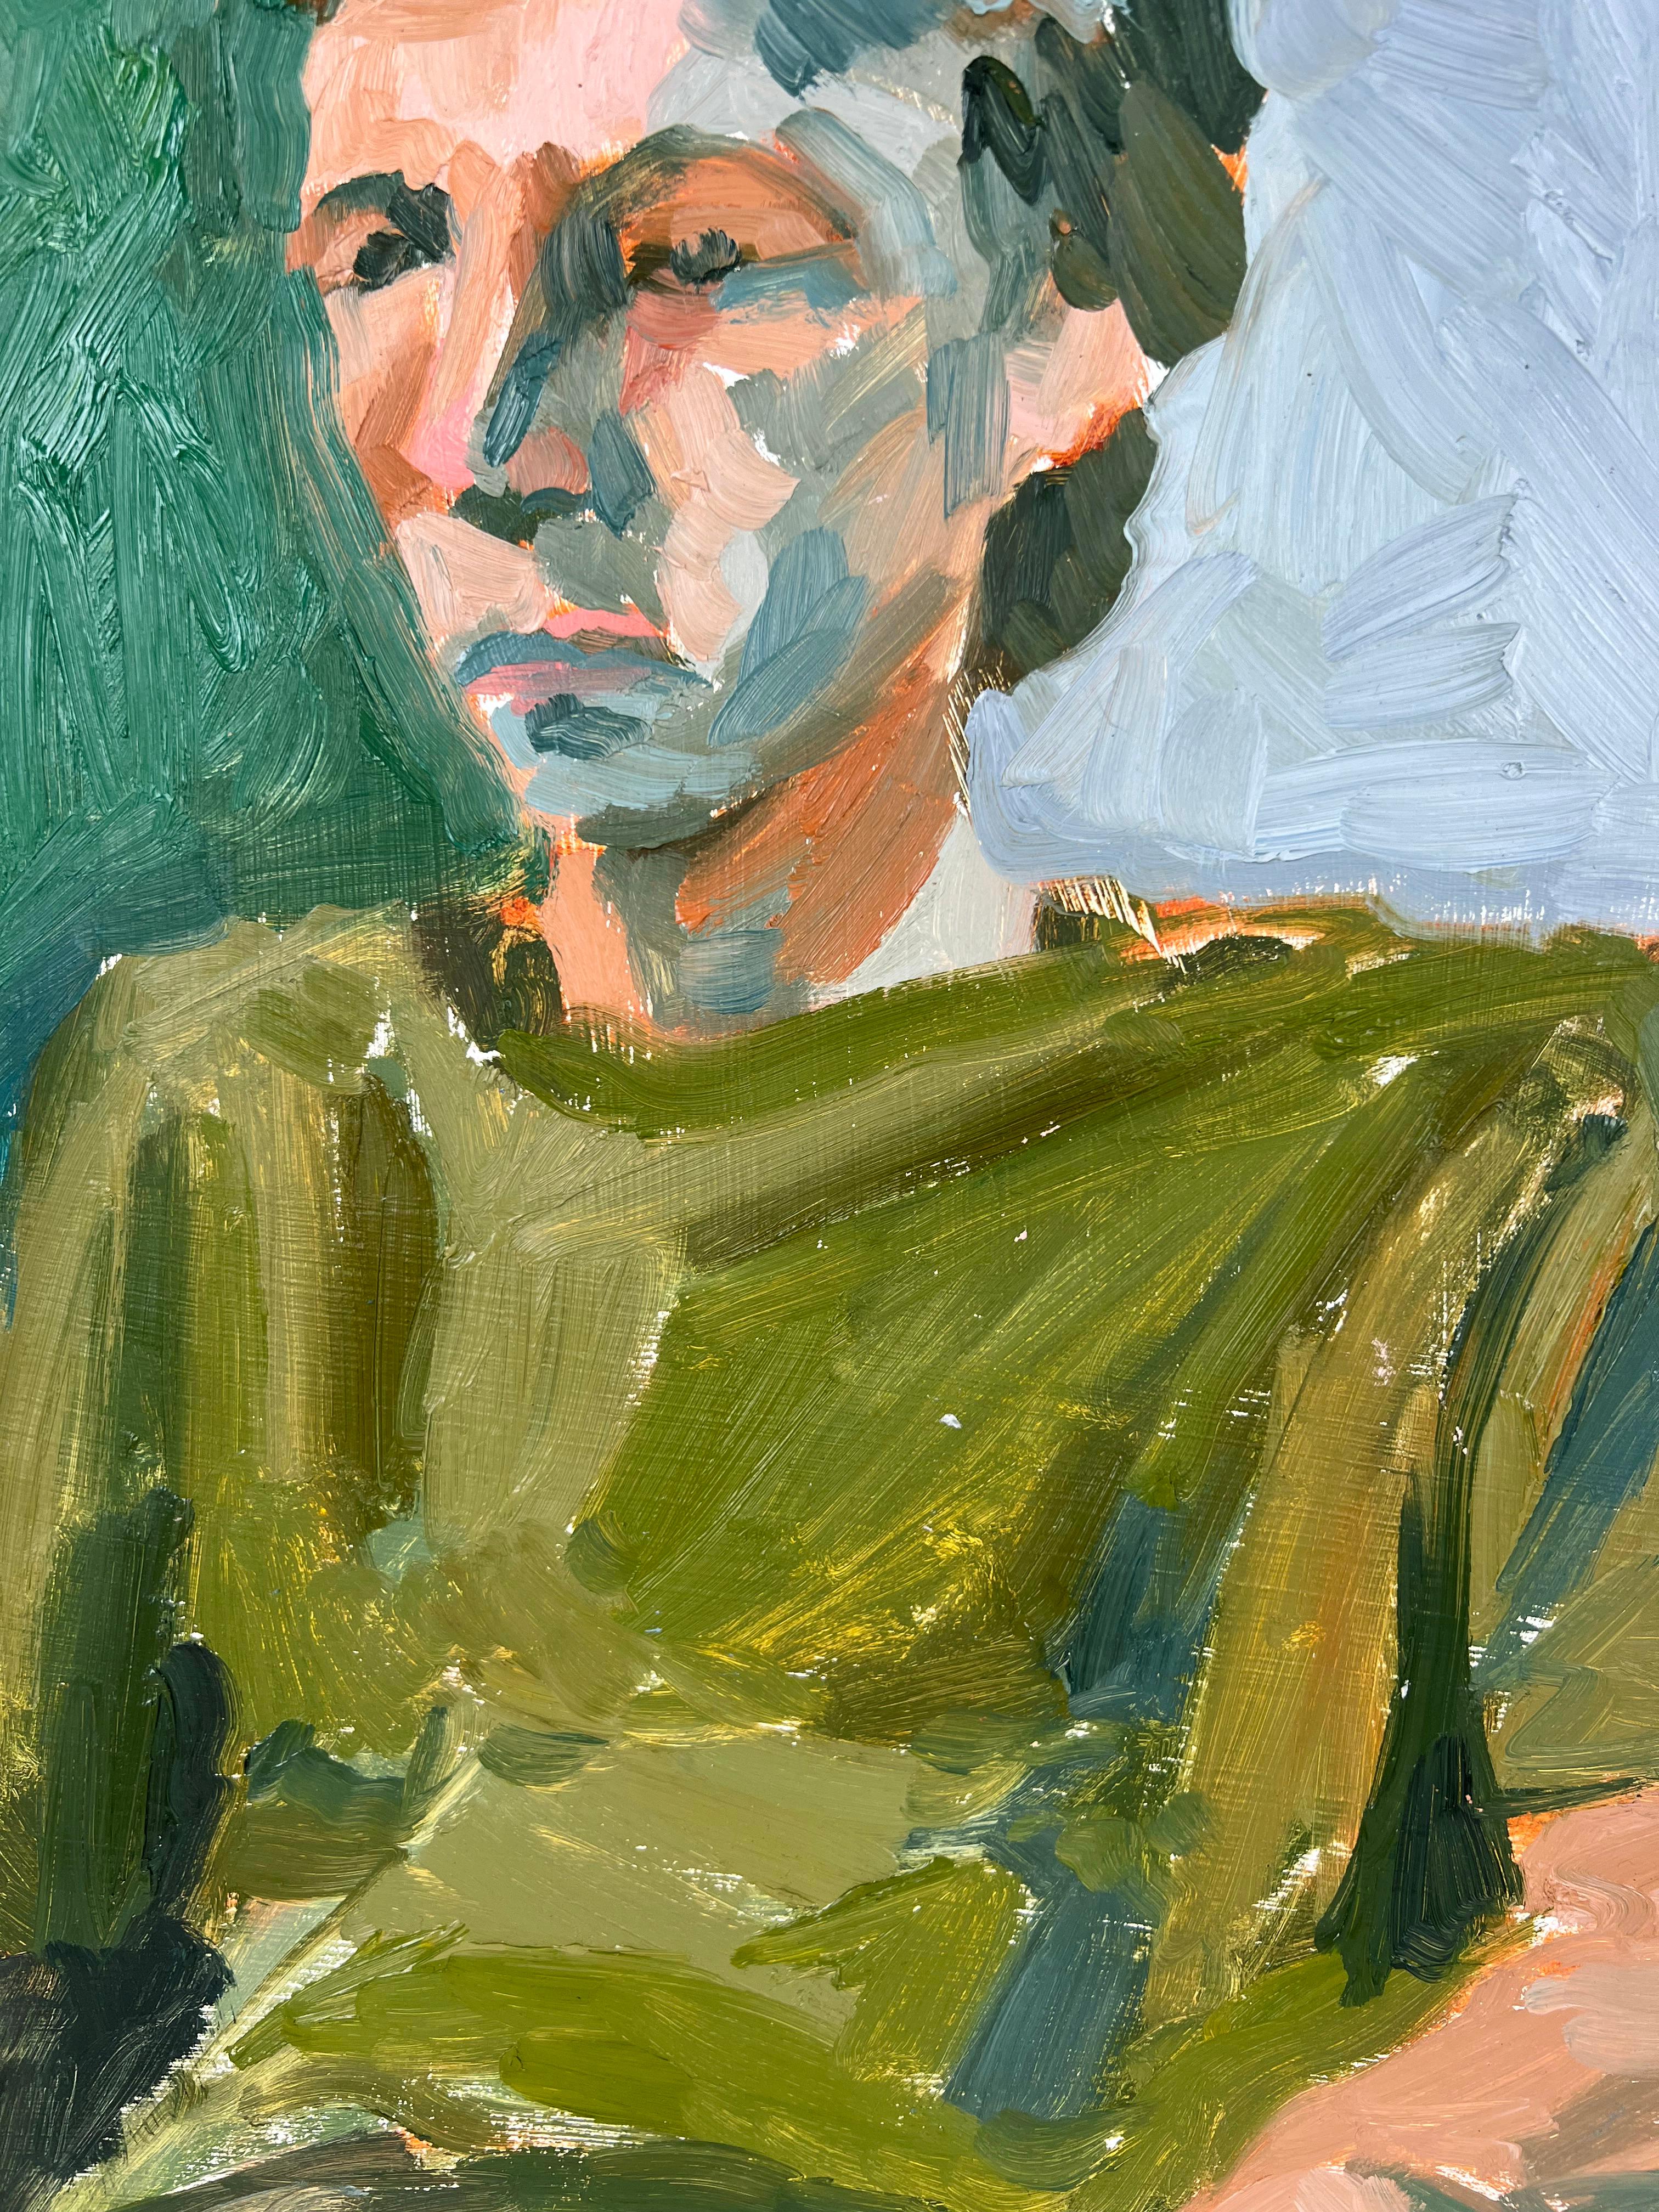 Seated Man Bay Area Figurative School Abstract Expressionist

Seated man, a abstract portrait by San Francisco artist Heather Speck (American, B-1978). The subject is painted in strong colors and broad strokes in greens, cyan and light umber.
Image,